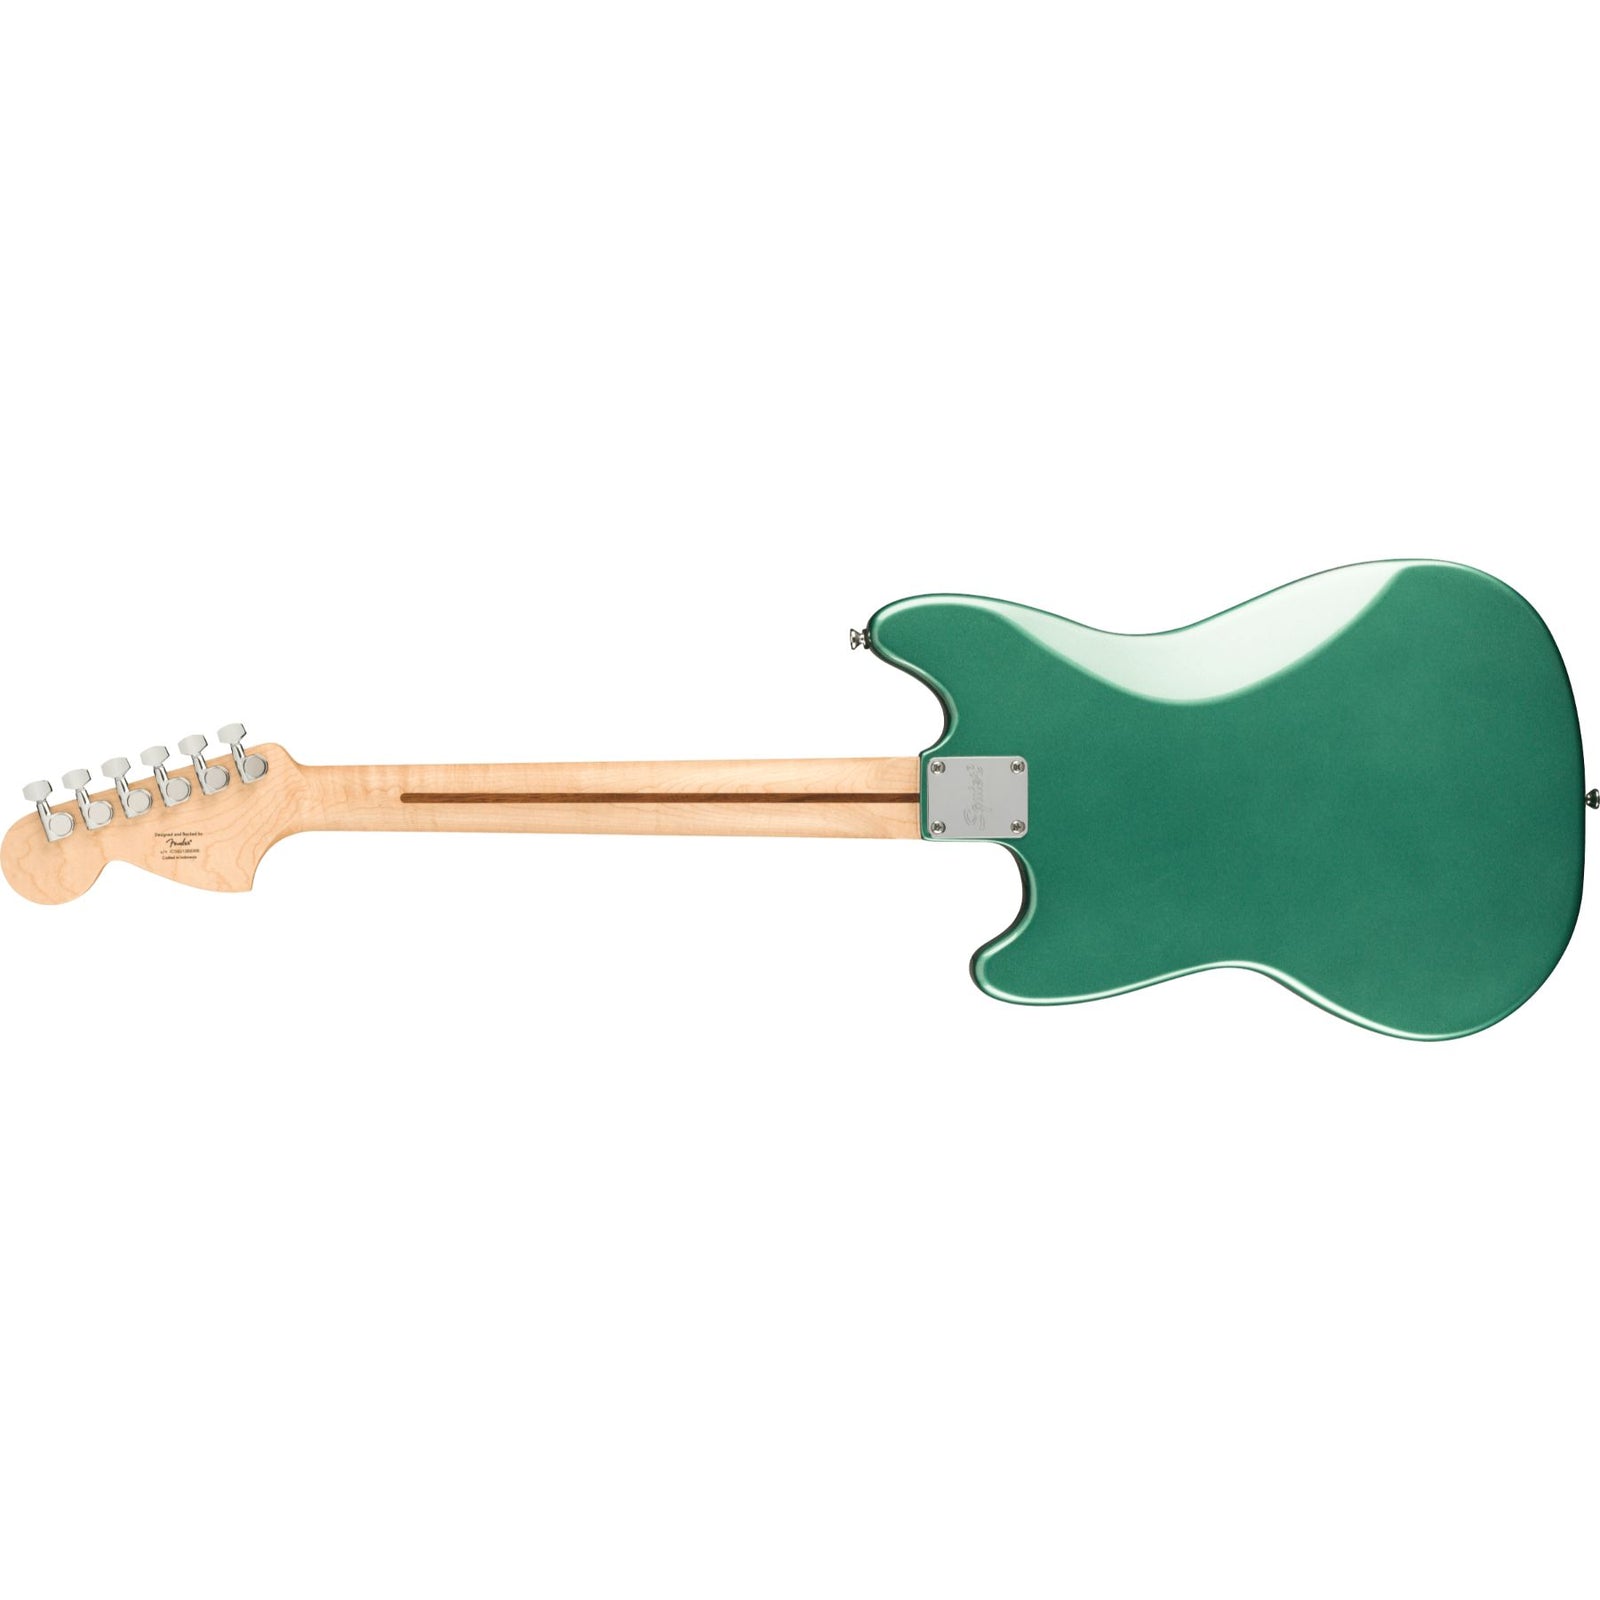 FSR Competition Mustang Sherwood Green – ness music